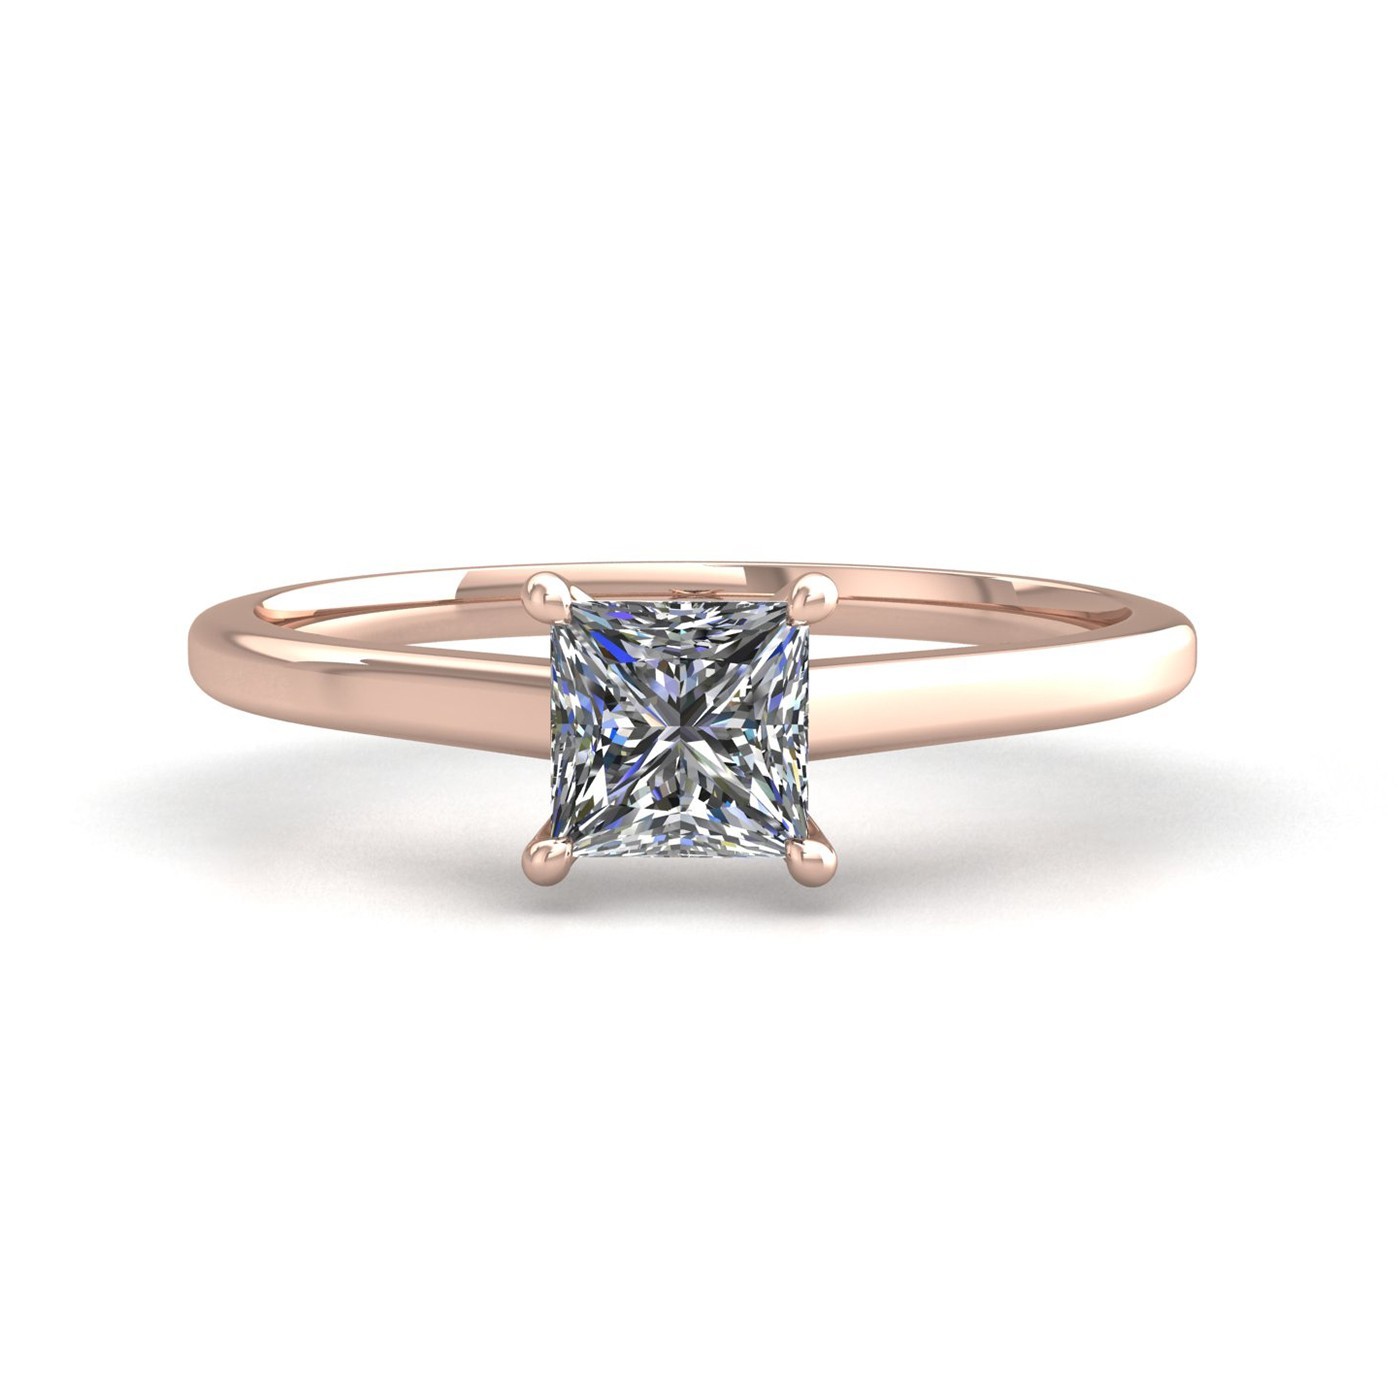 18k rose gold  1,00 ct 4 prongs solitaire princess cut diamond engagement ring with whisper thin band Photos & images